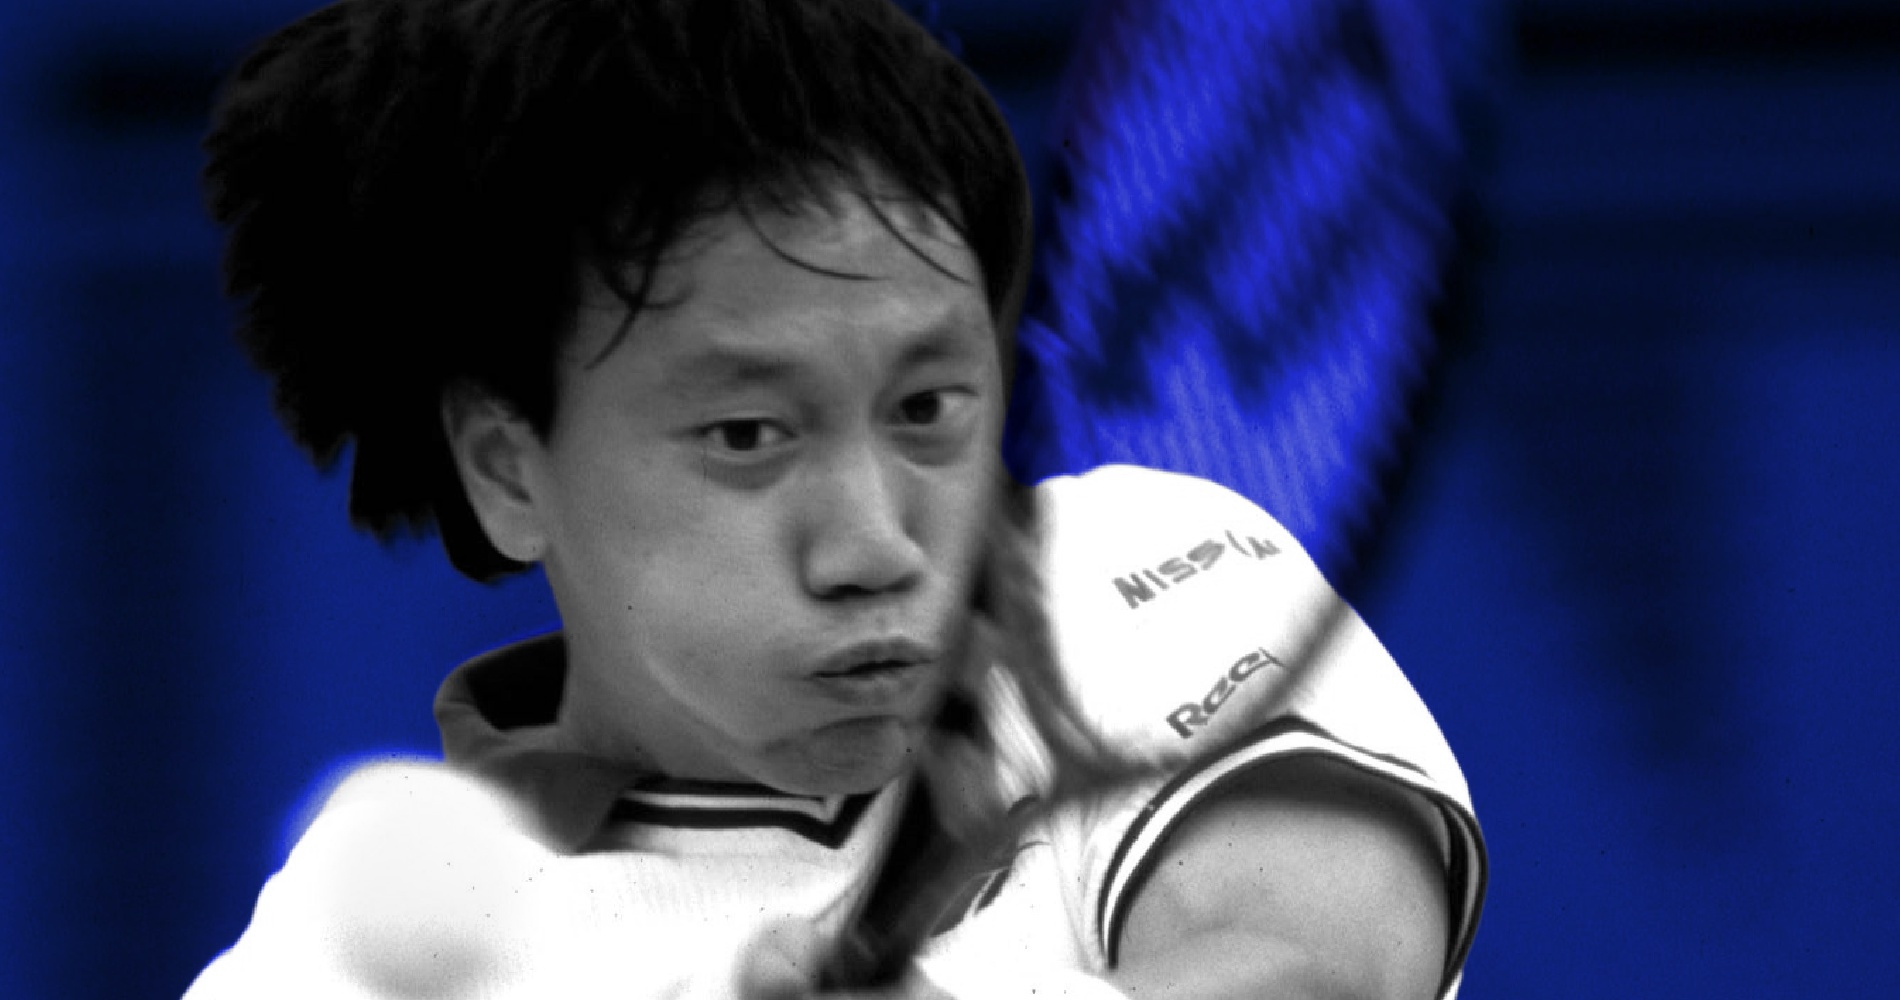 Michael Chang, On this day 03.02.2021